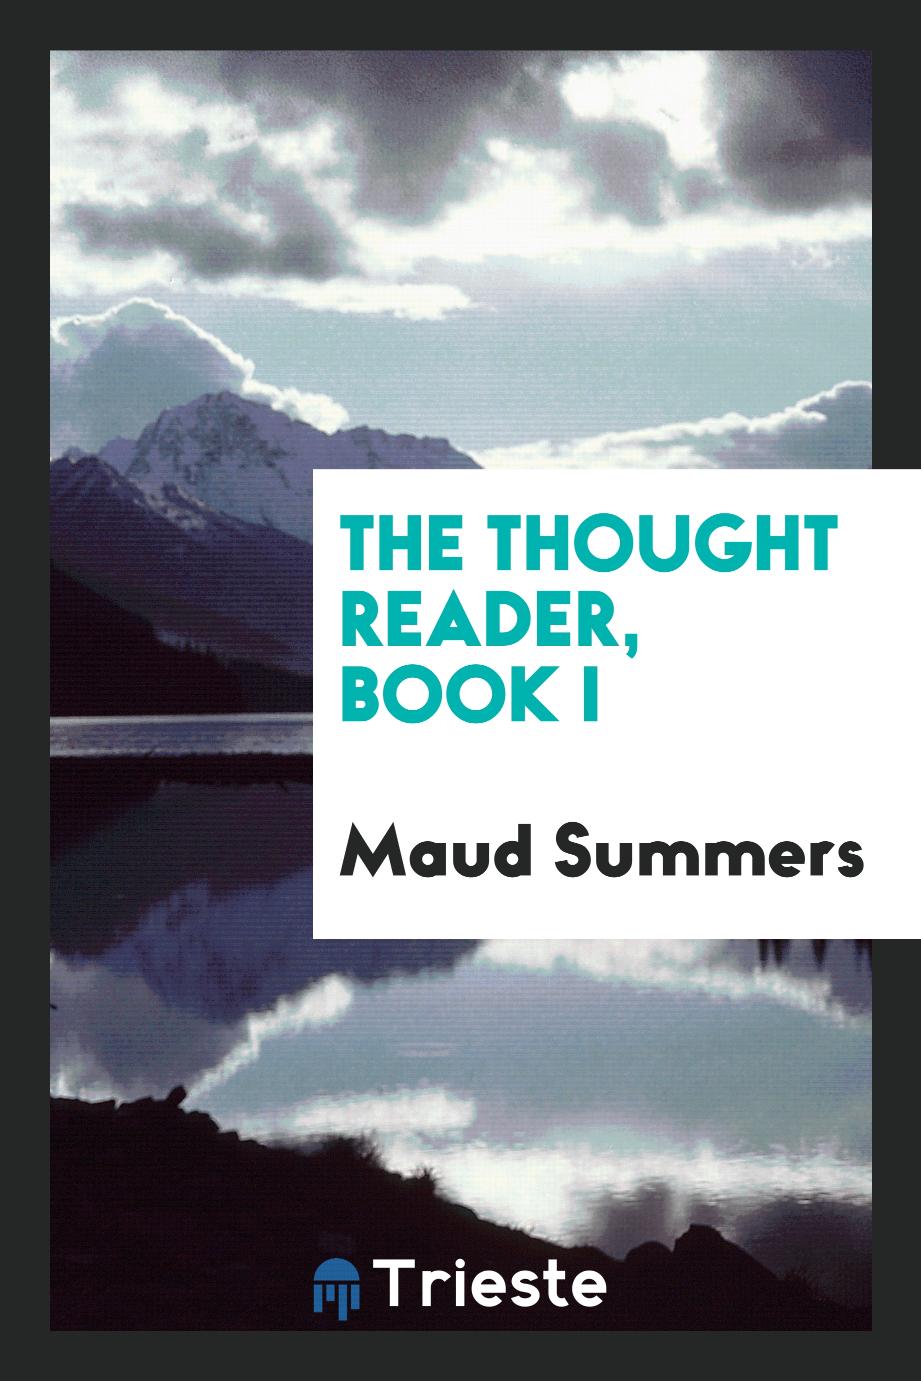 The Thought Reader, Book I